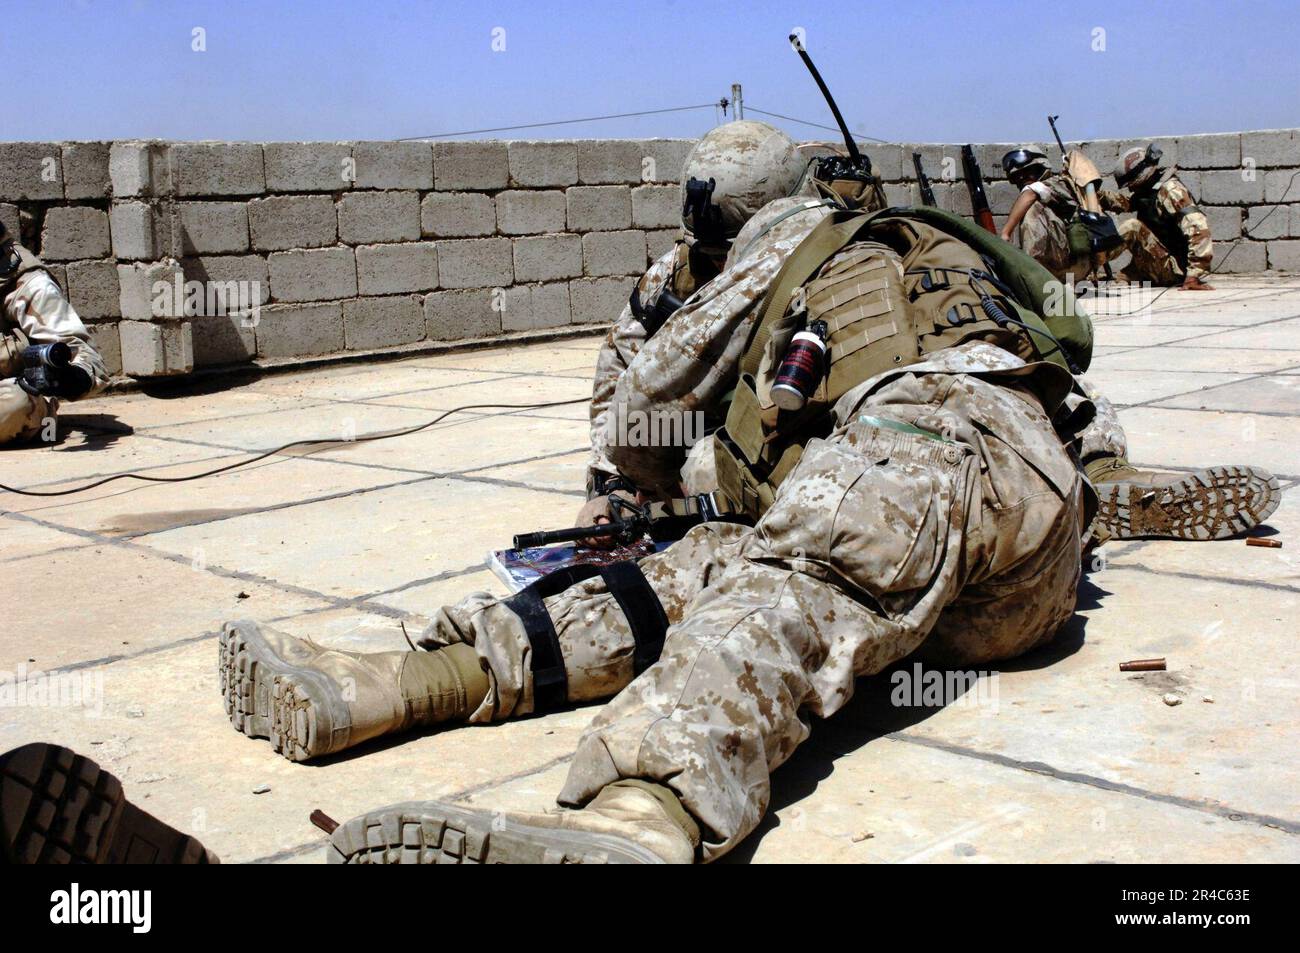 US Navy  U.S. Marines take a low position and formulate a battle strategy to flush insurgents from their fighting positions during a rooftop gun battle in Ramadi, Iraq. Stock Photo